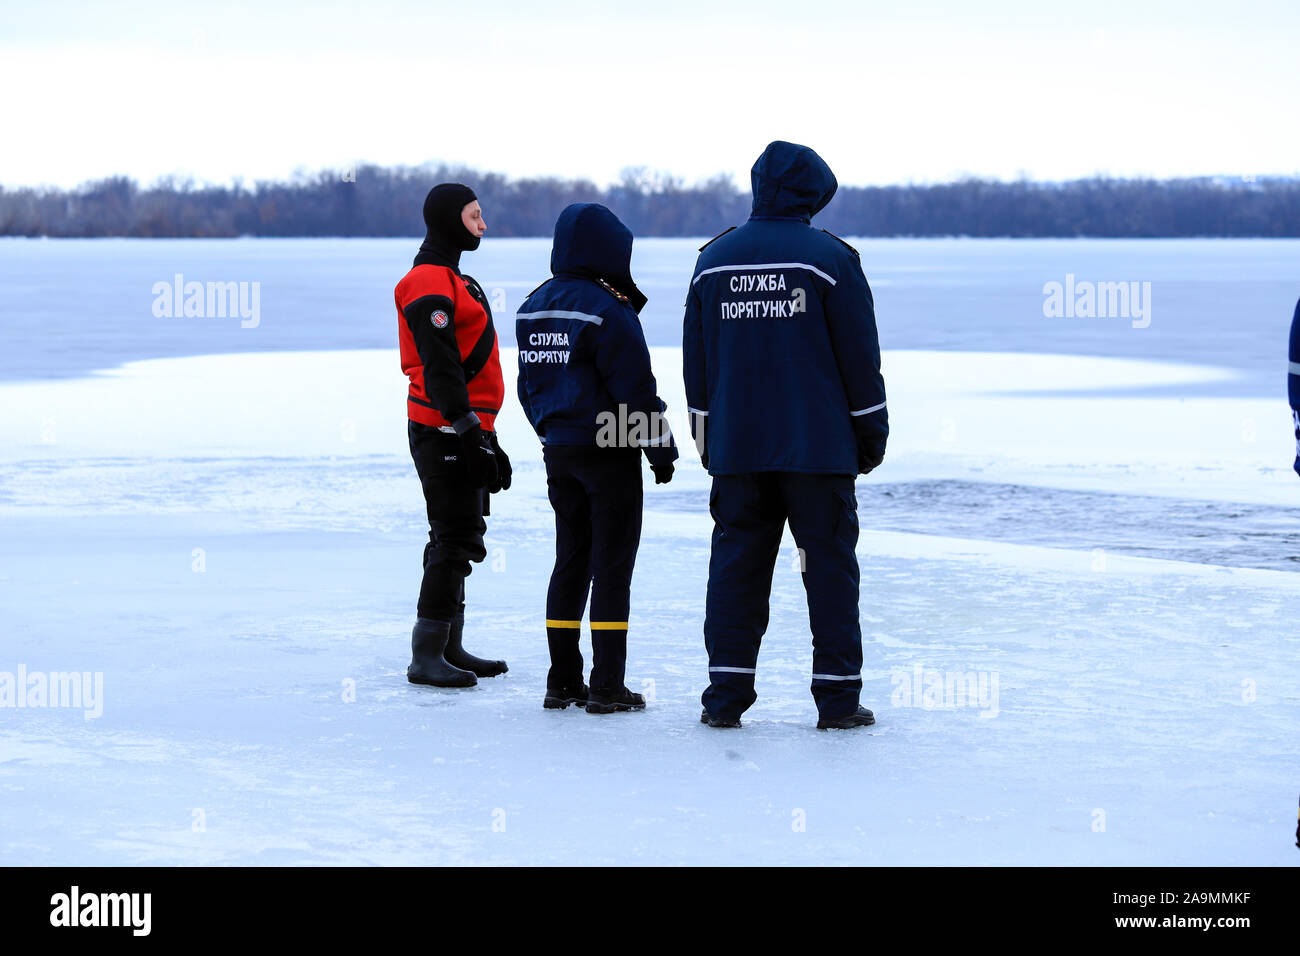 Dnipro city, Ukraine,19.01 2019.Rescuers in uniform and diving suit are on duty on the frozen river during winter fishing and sport events. Rescue Stock Photo